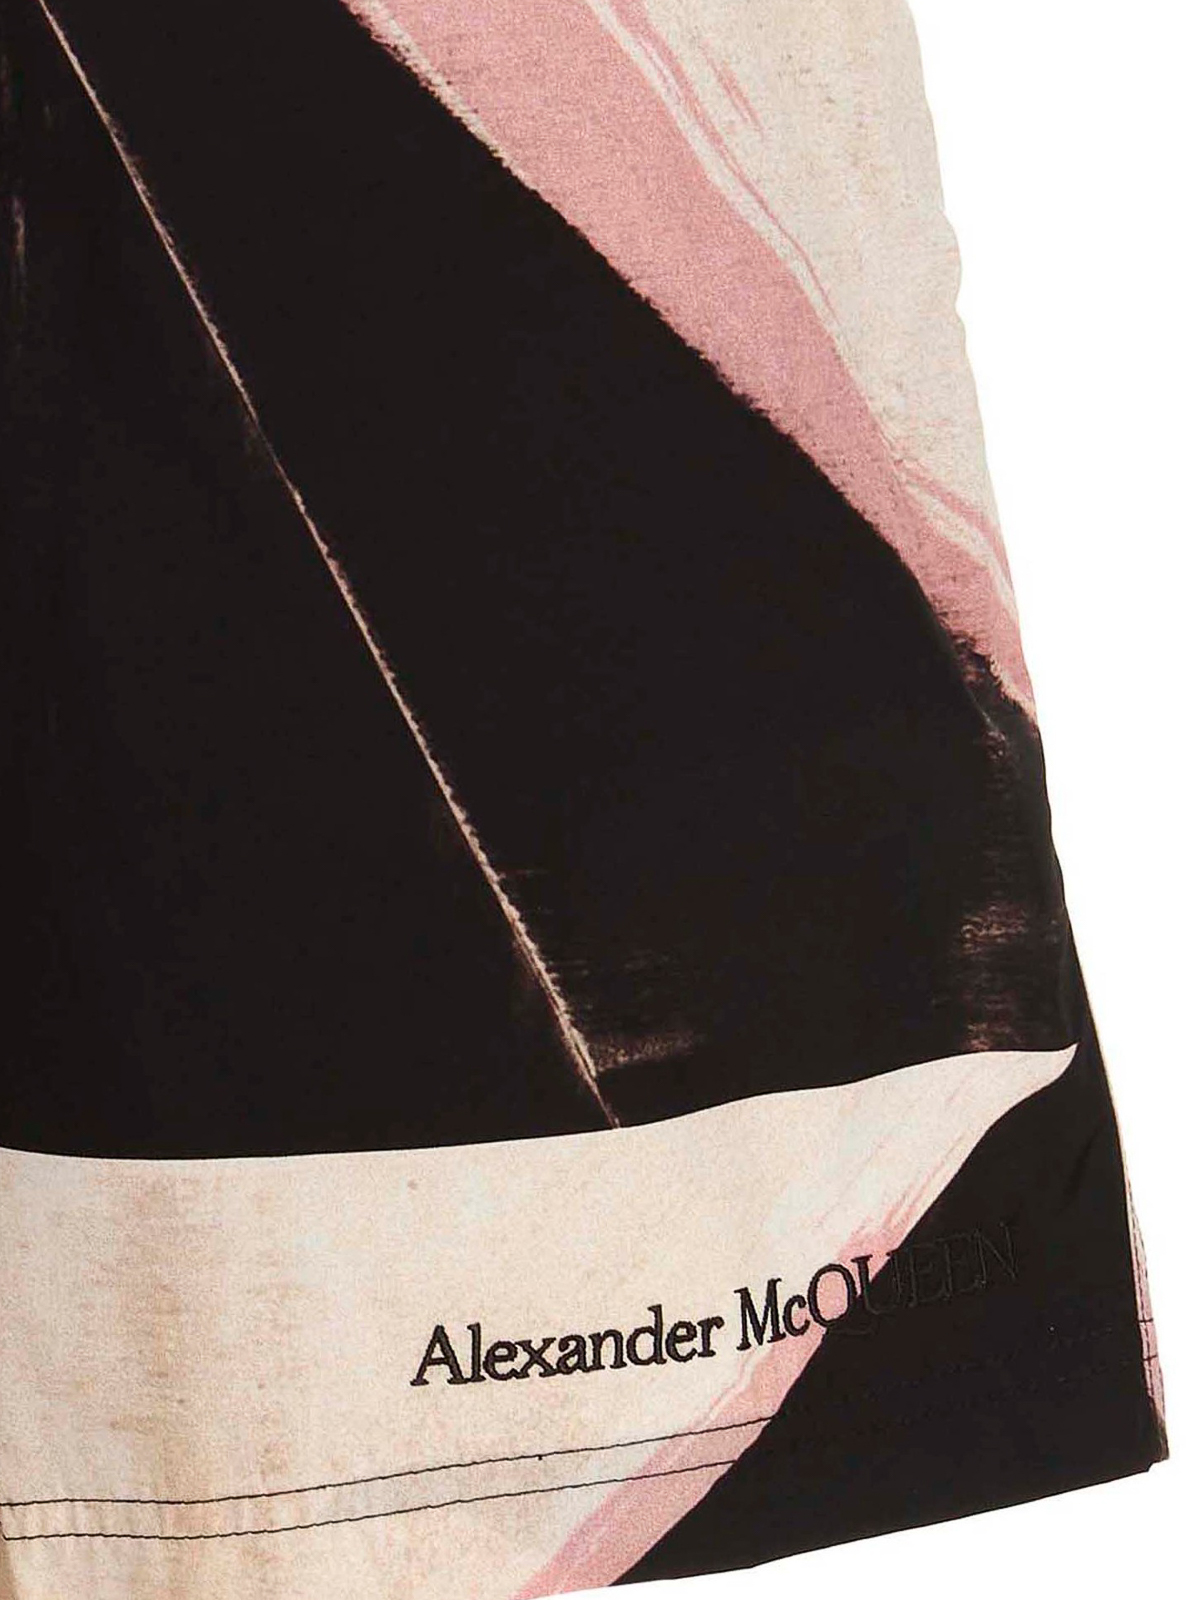 Shop Alexander Mcqueen Printed Swimming Trunks In Multicolour